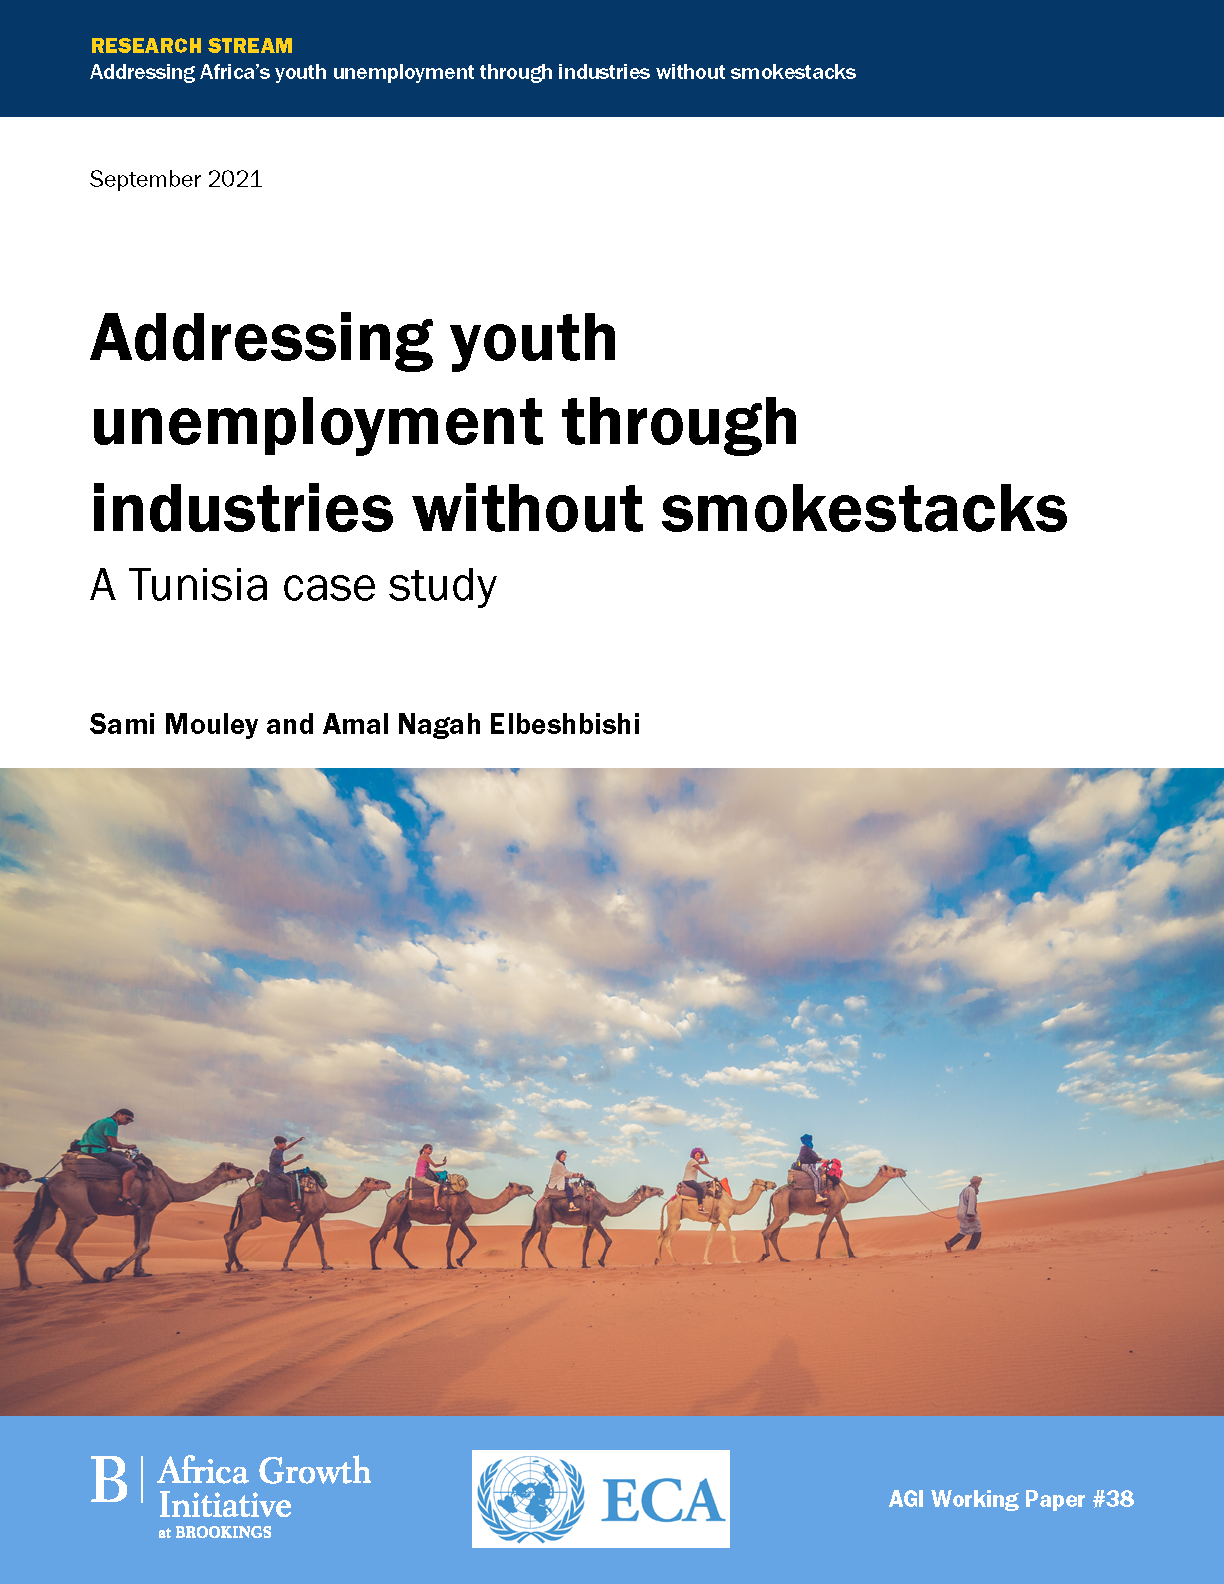 Addressing Youth Unemployment Through Industries Without Smokestacks: A Tunisia Case Study